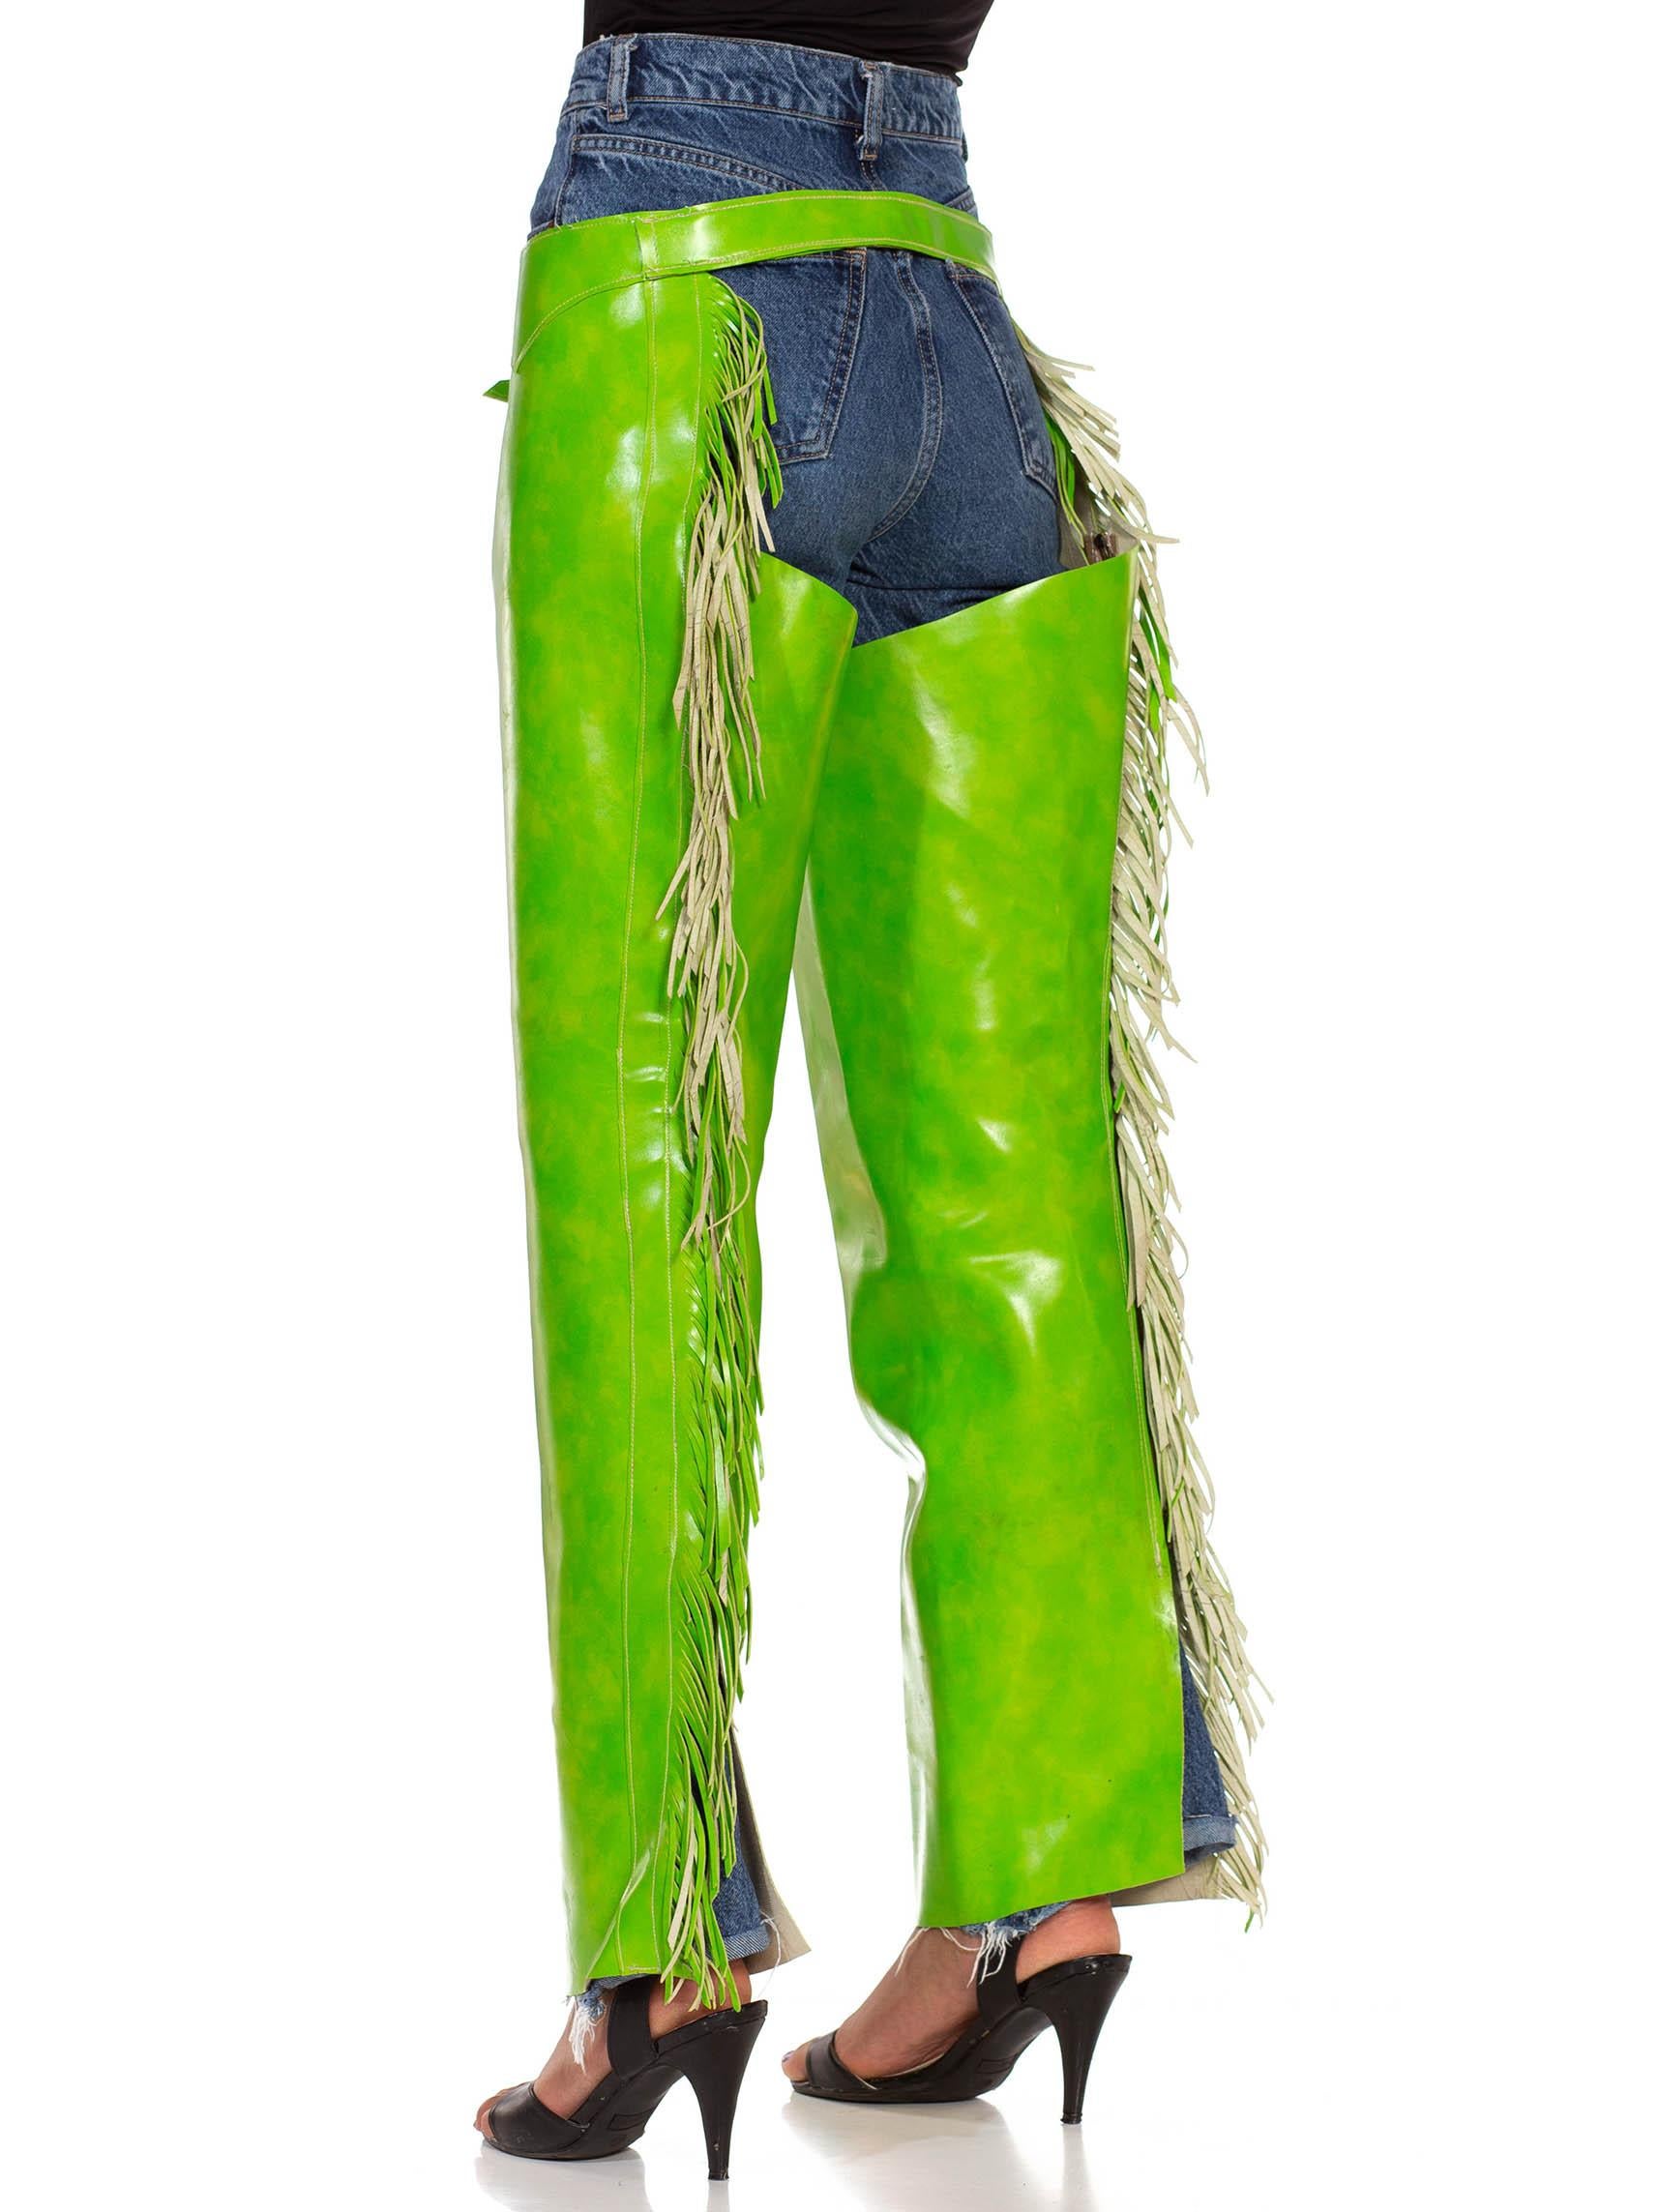 Women's or Men's 1990S Lime Green Western Style & Fringe Chaps